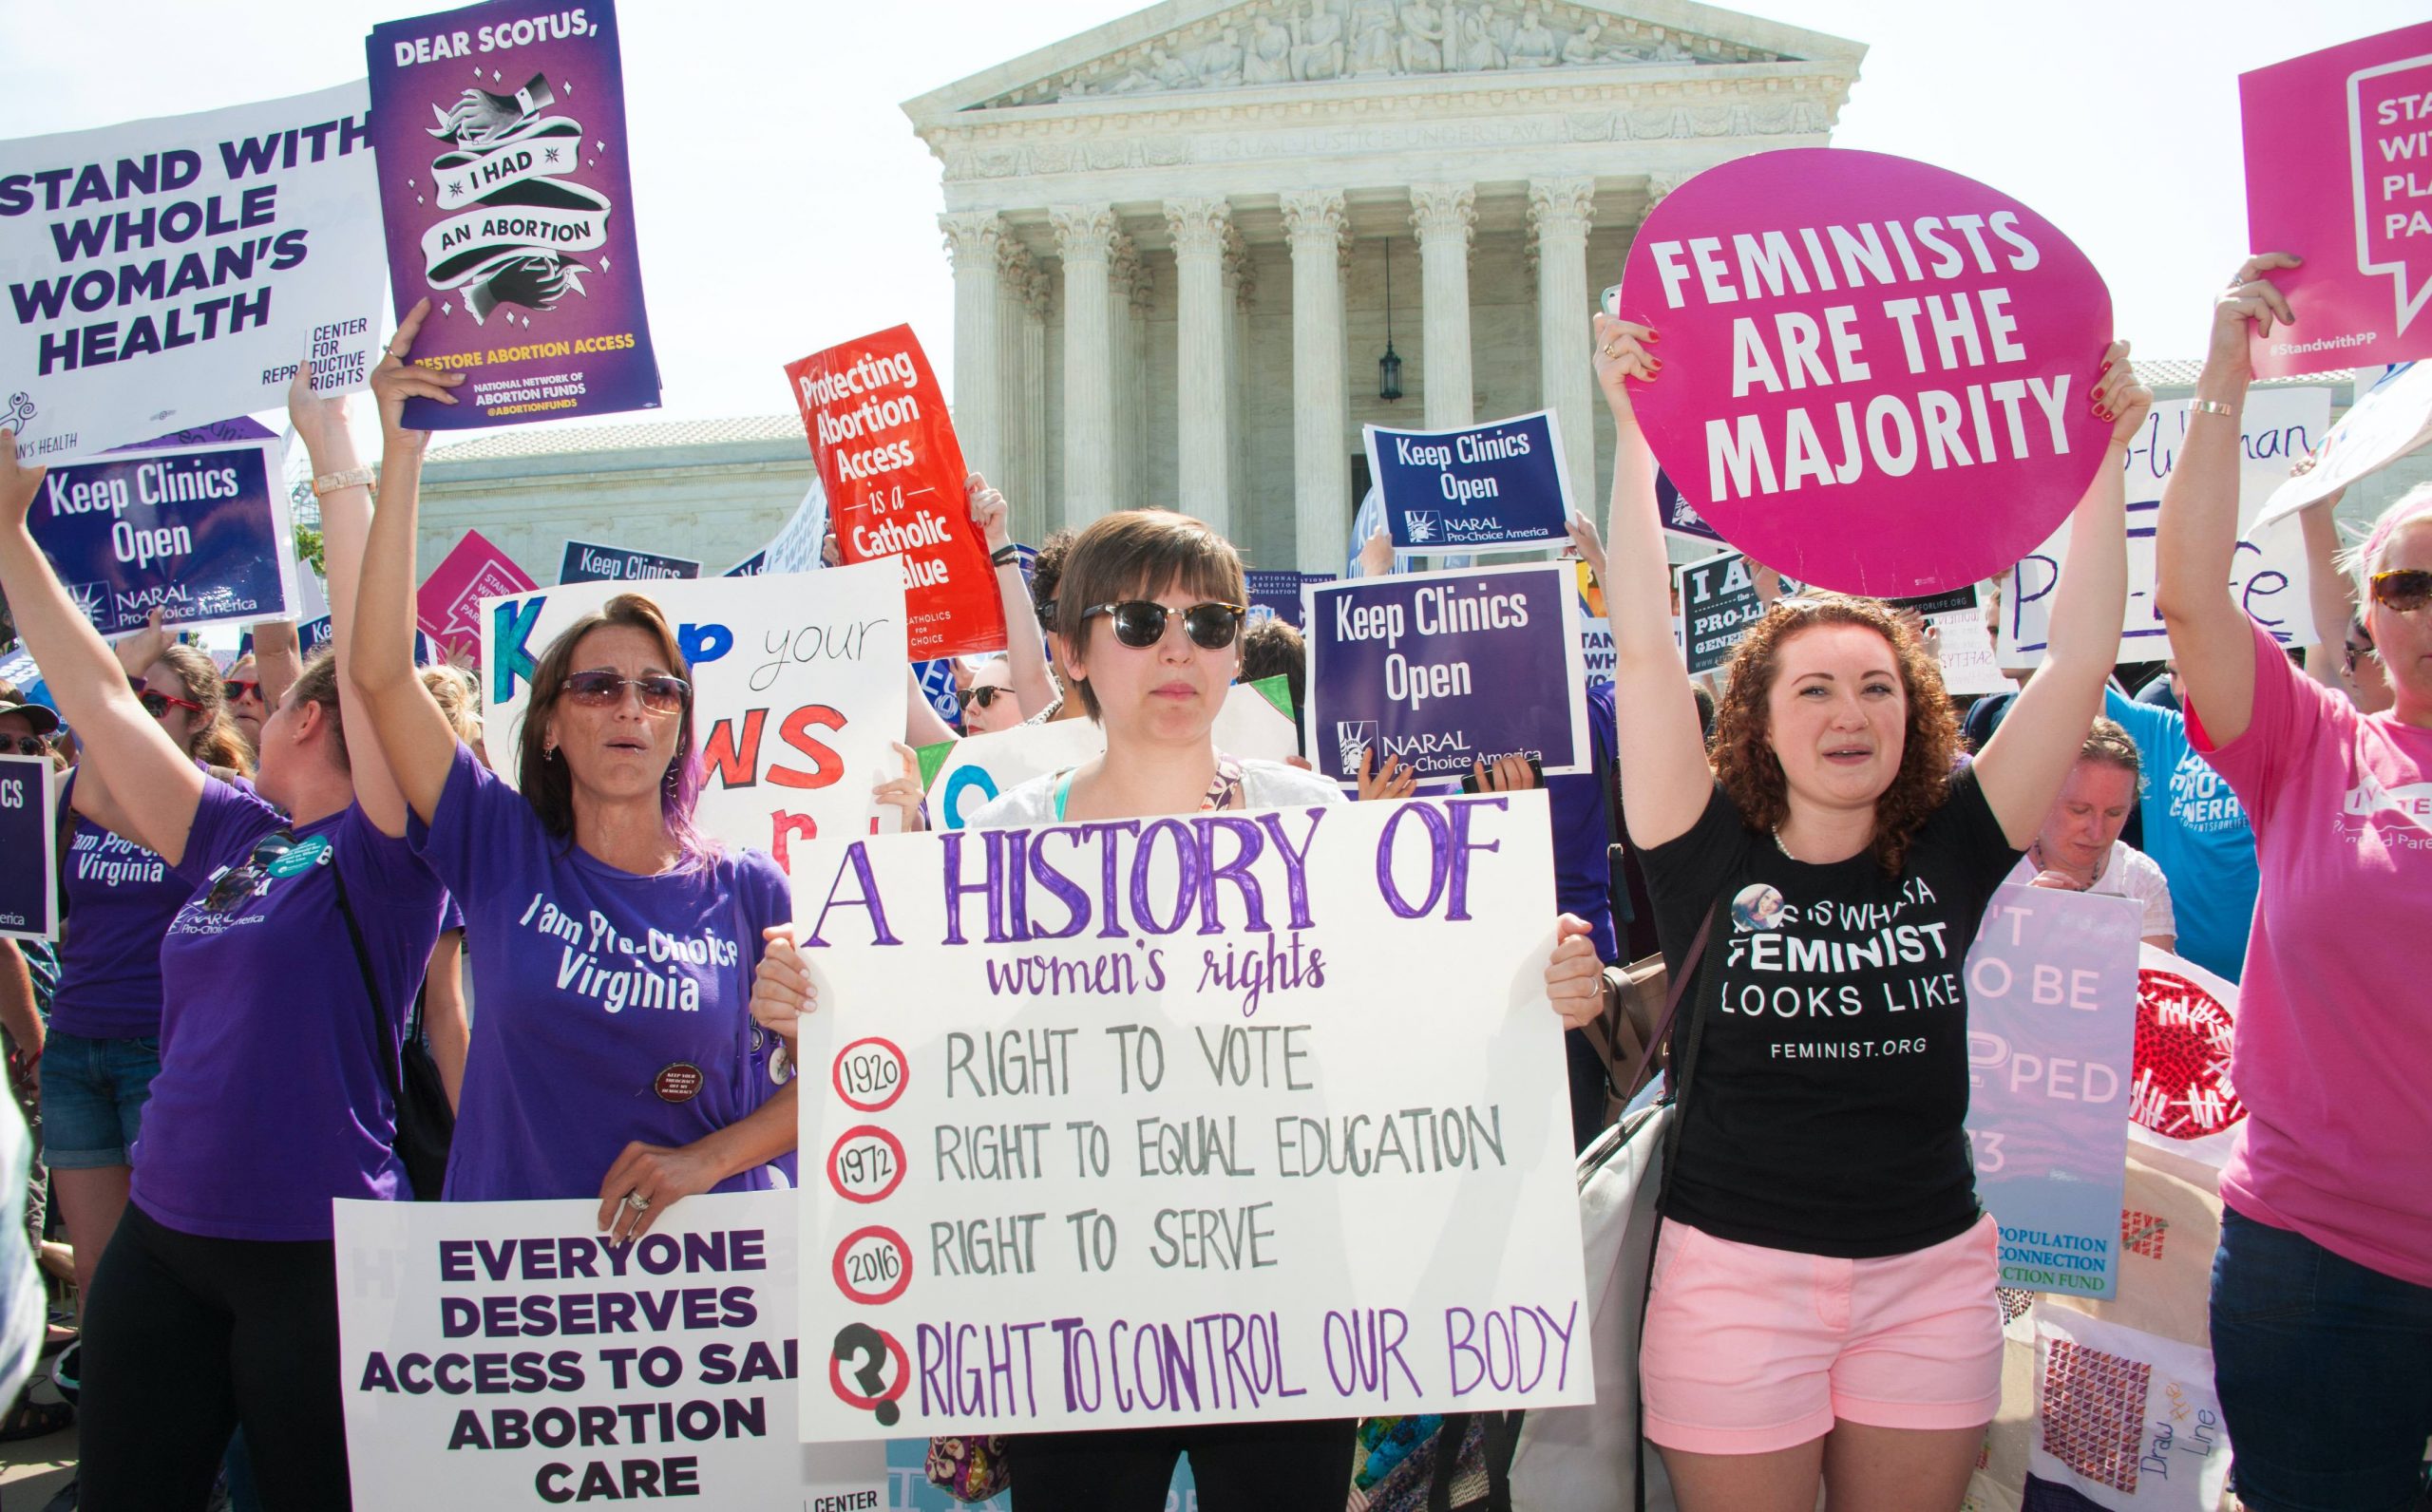 large crowd of women holding signs supporting abortion rights in front of Supreme Court